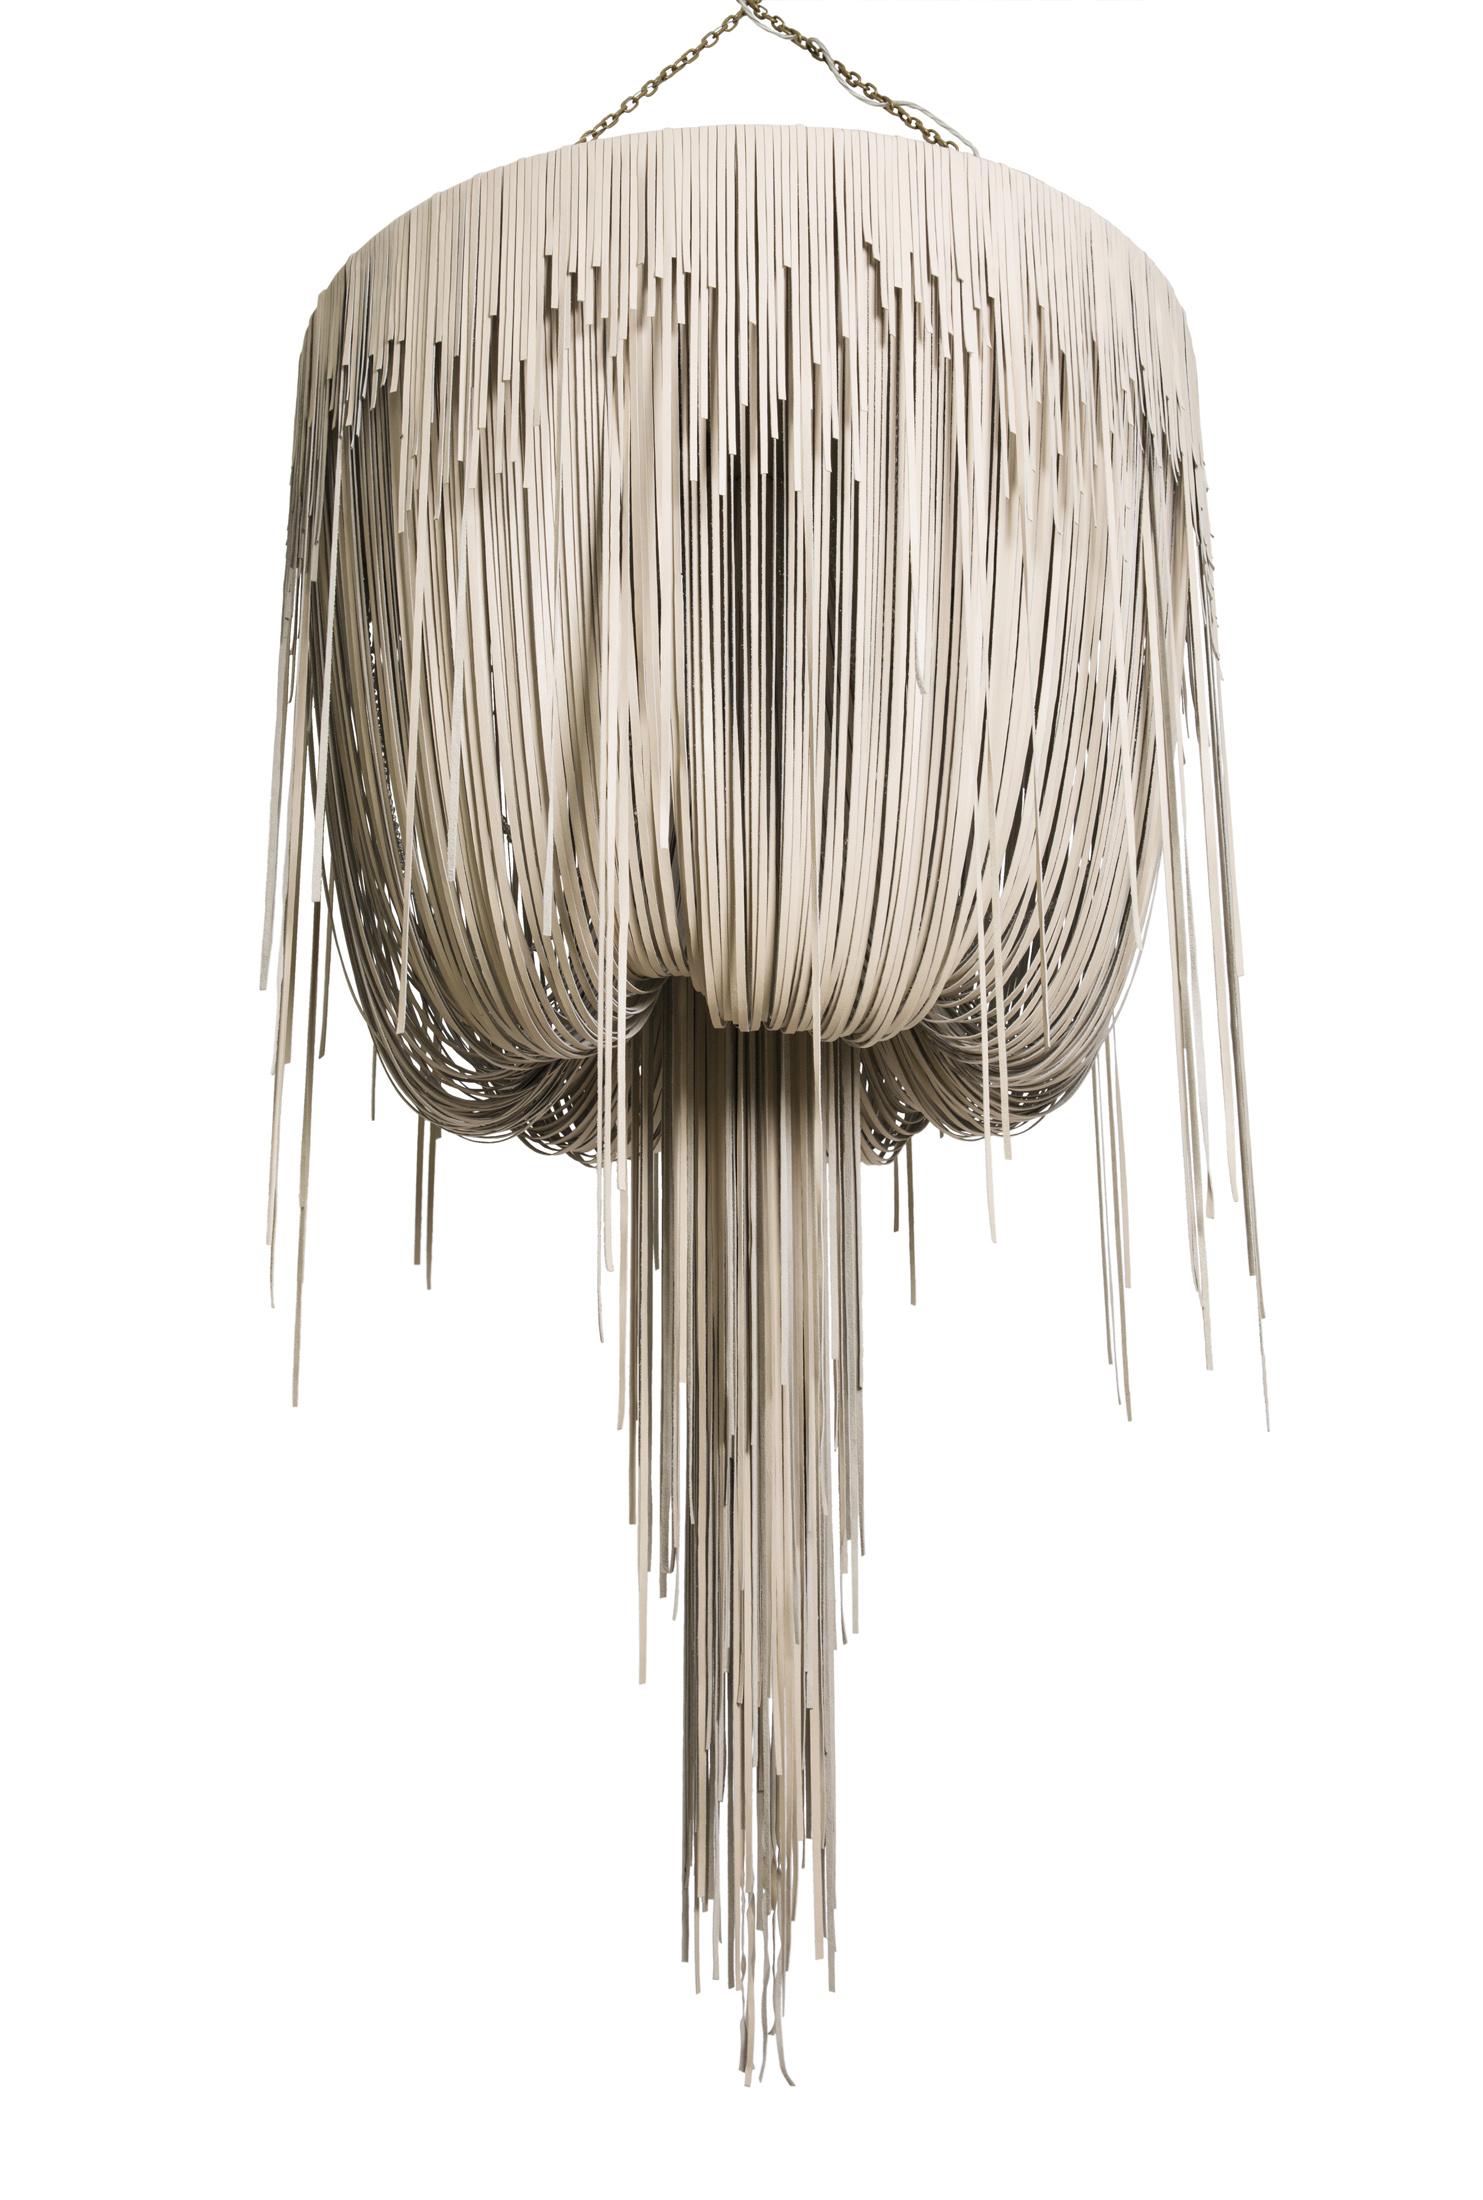 Large Round Urchin Leather Chandelier in Cream-Stone Leather